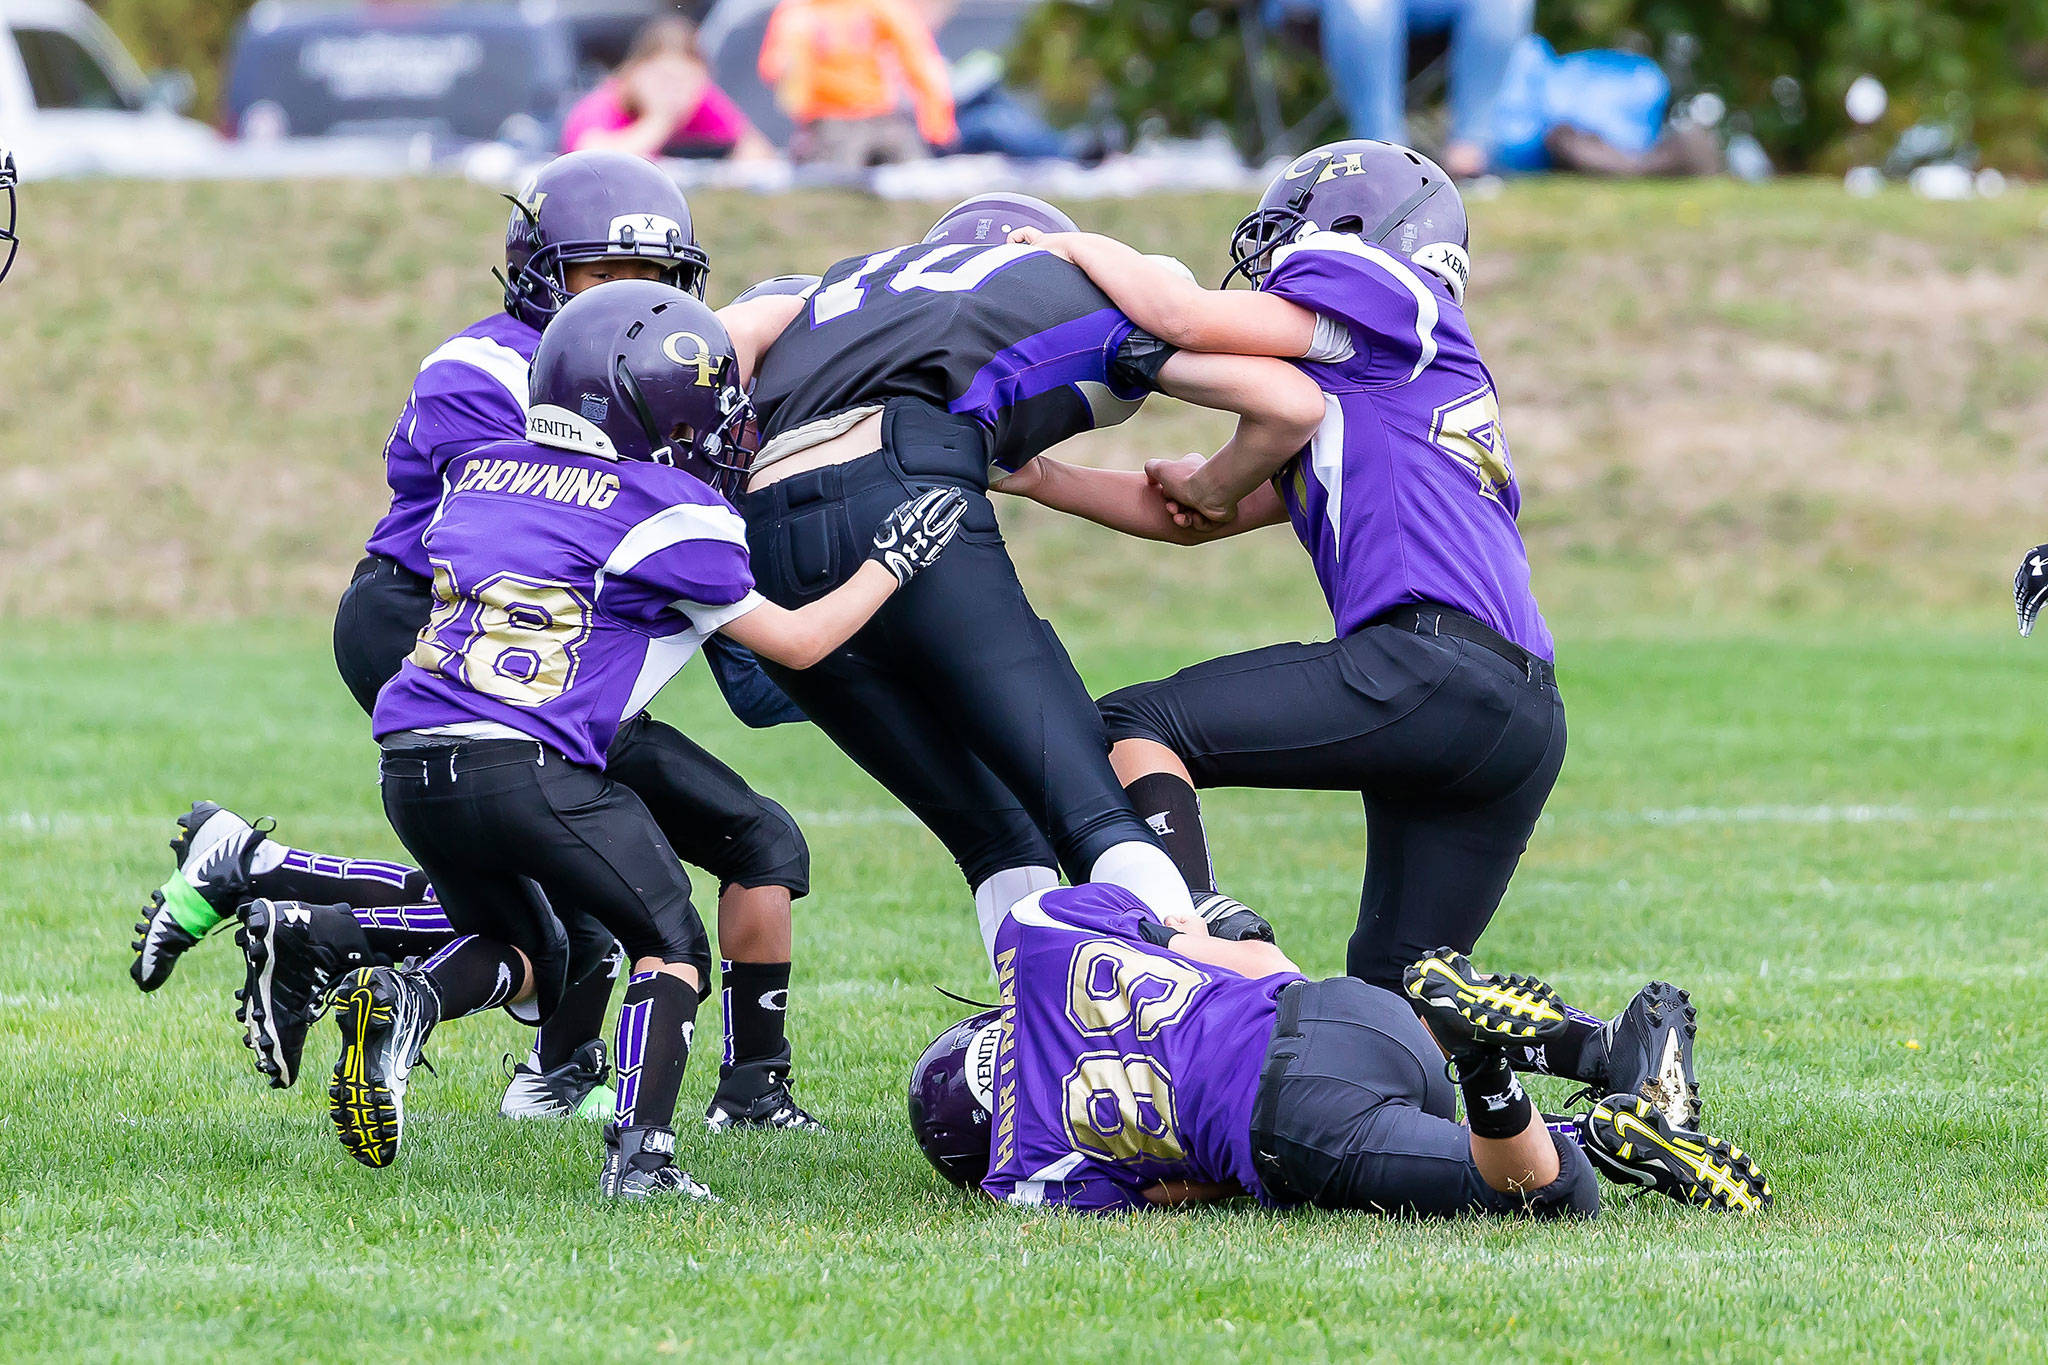 Oak Harbor players gang tackle an opponent in one of Saturday’s youth football games. (Photos by John Fisken)